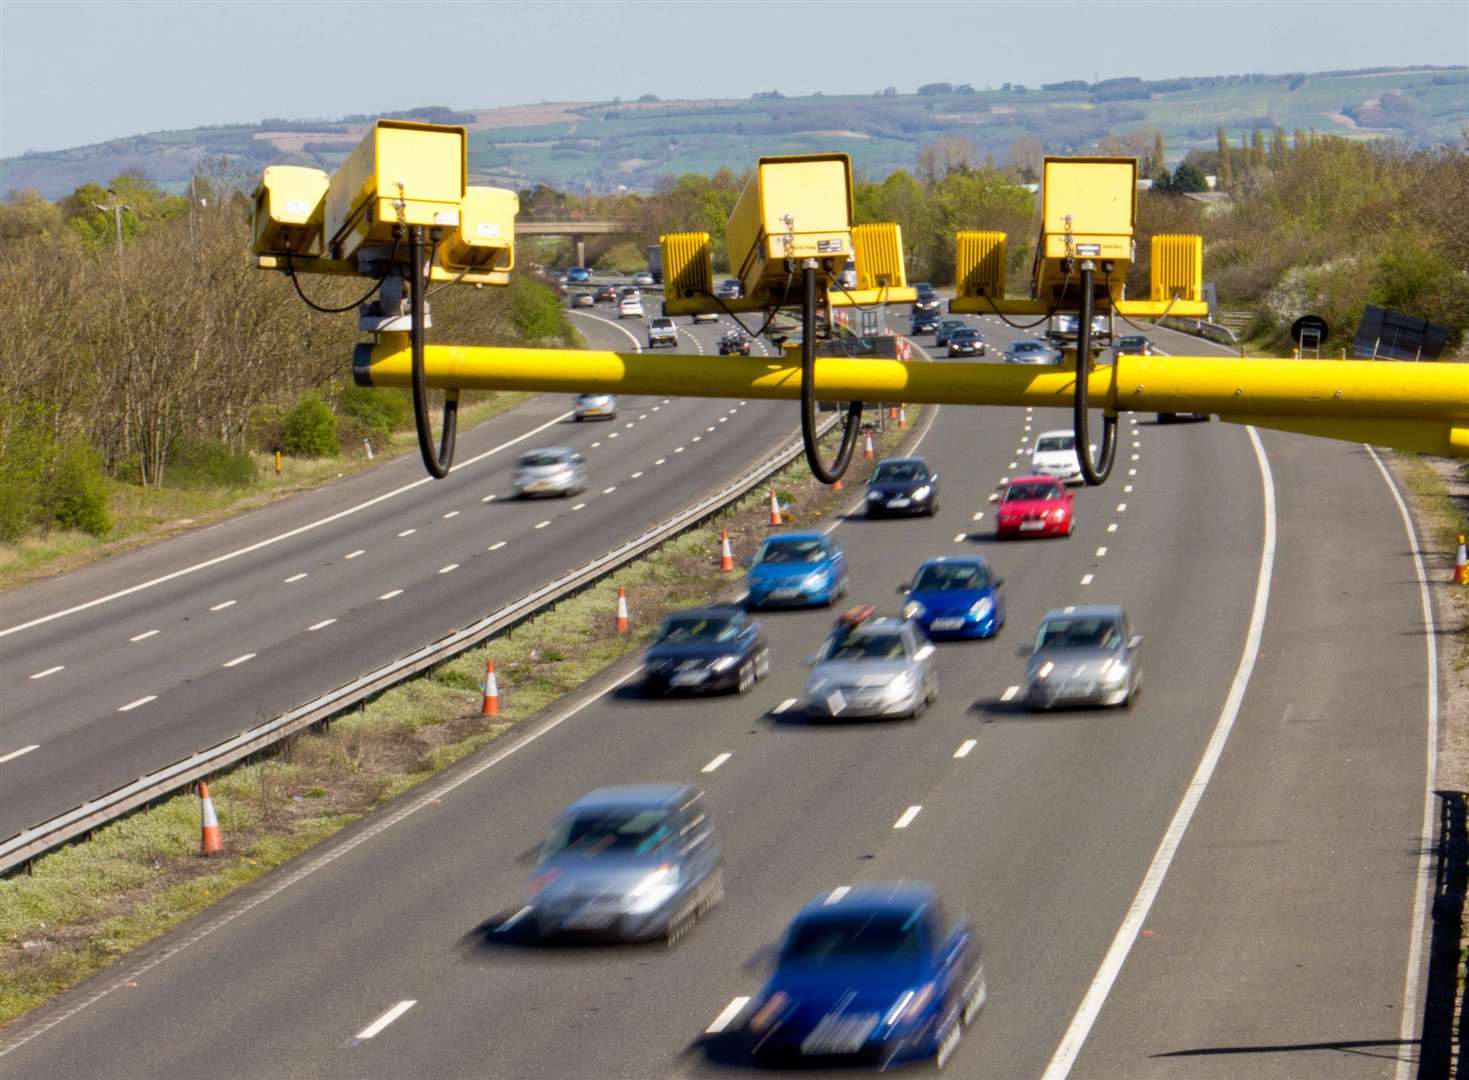 Average speed cameras will calculate your speed between two points. Image: iStock.